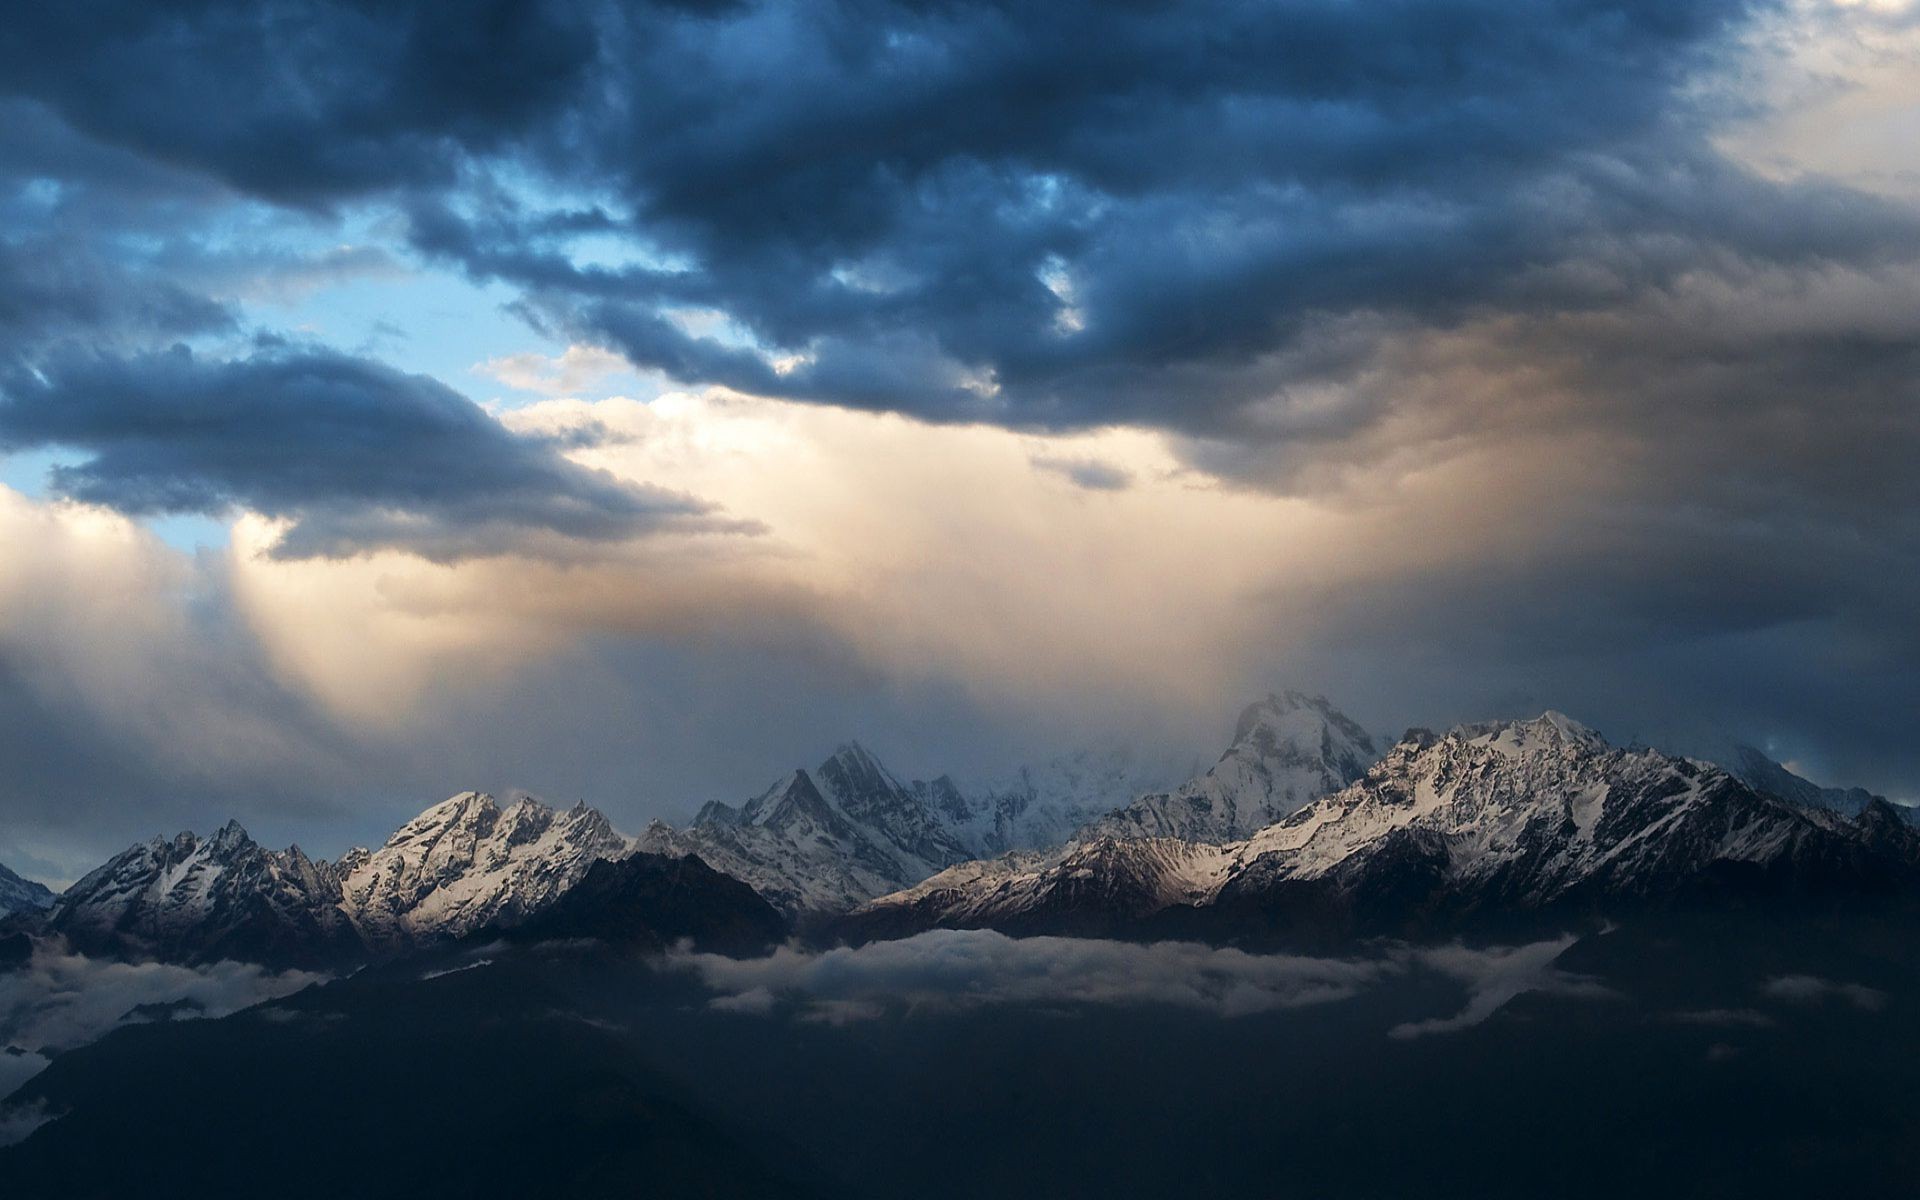 Storm clouds over the mountain peaks Widescreen Wallpaper